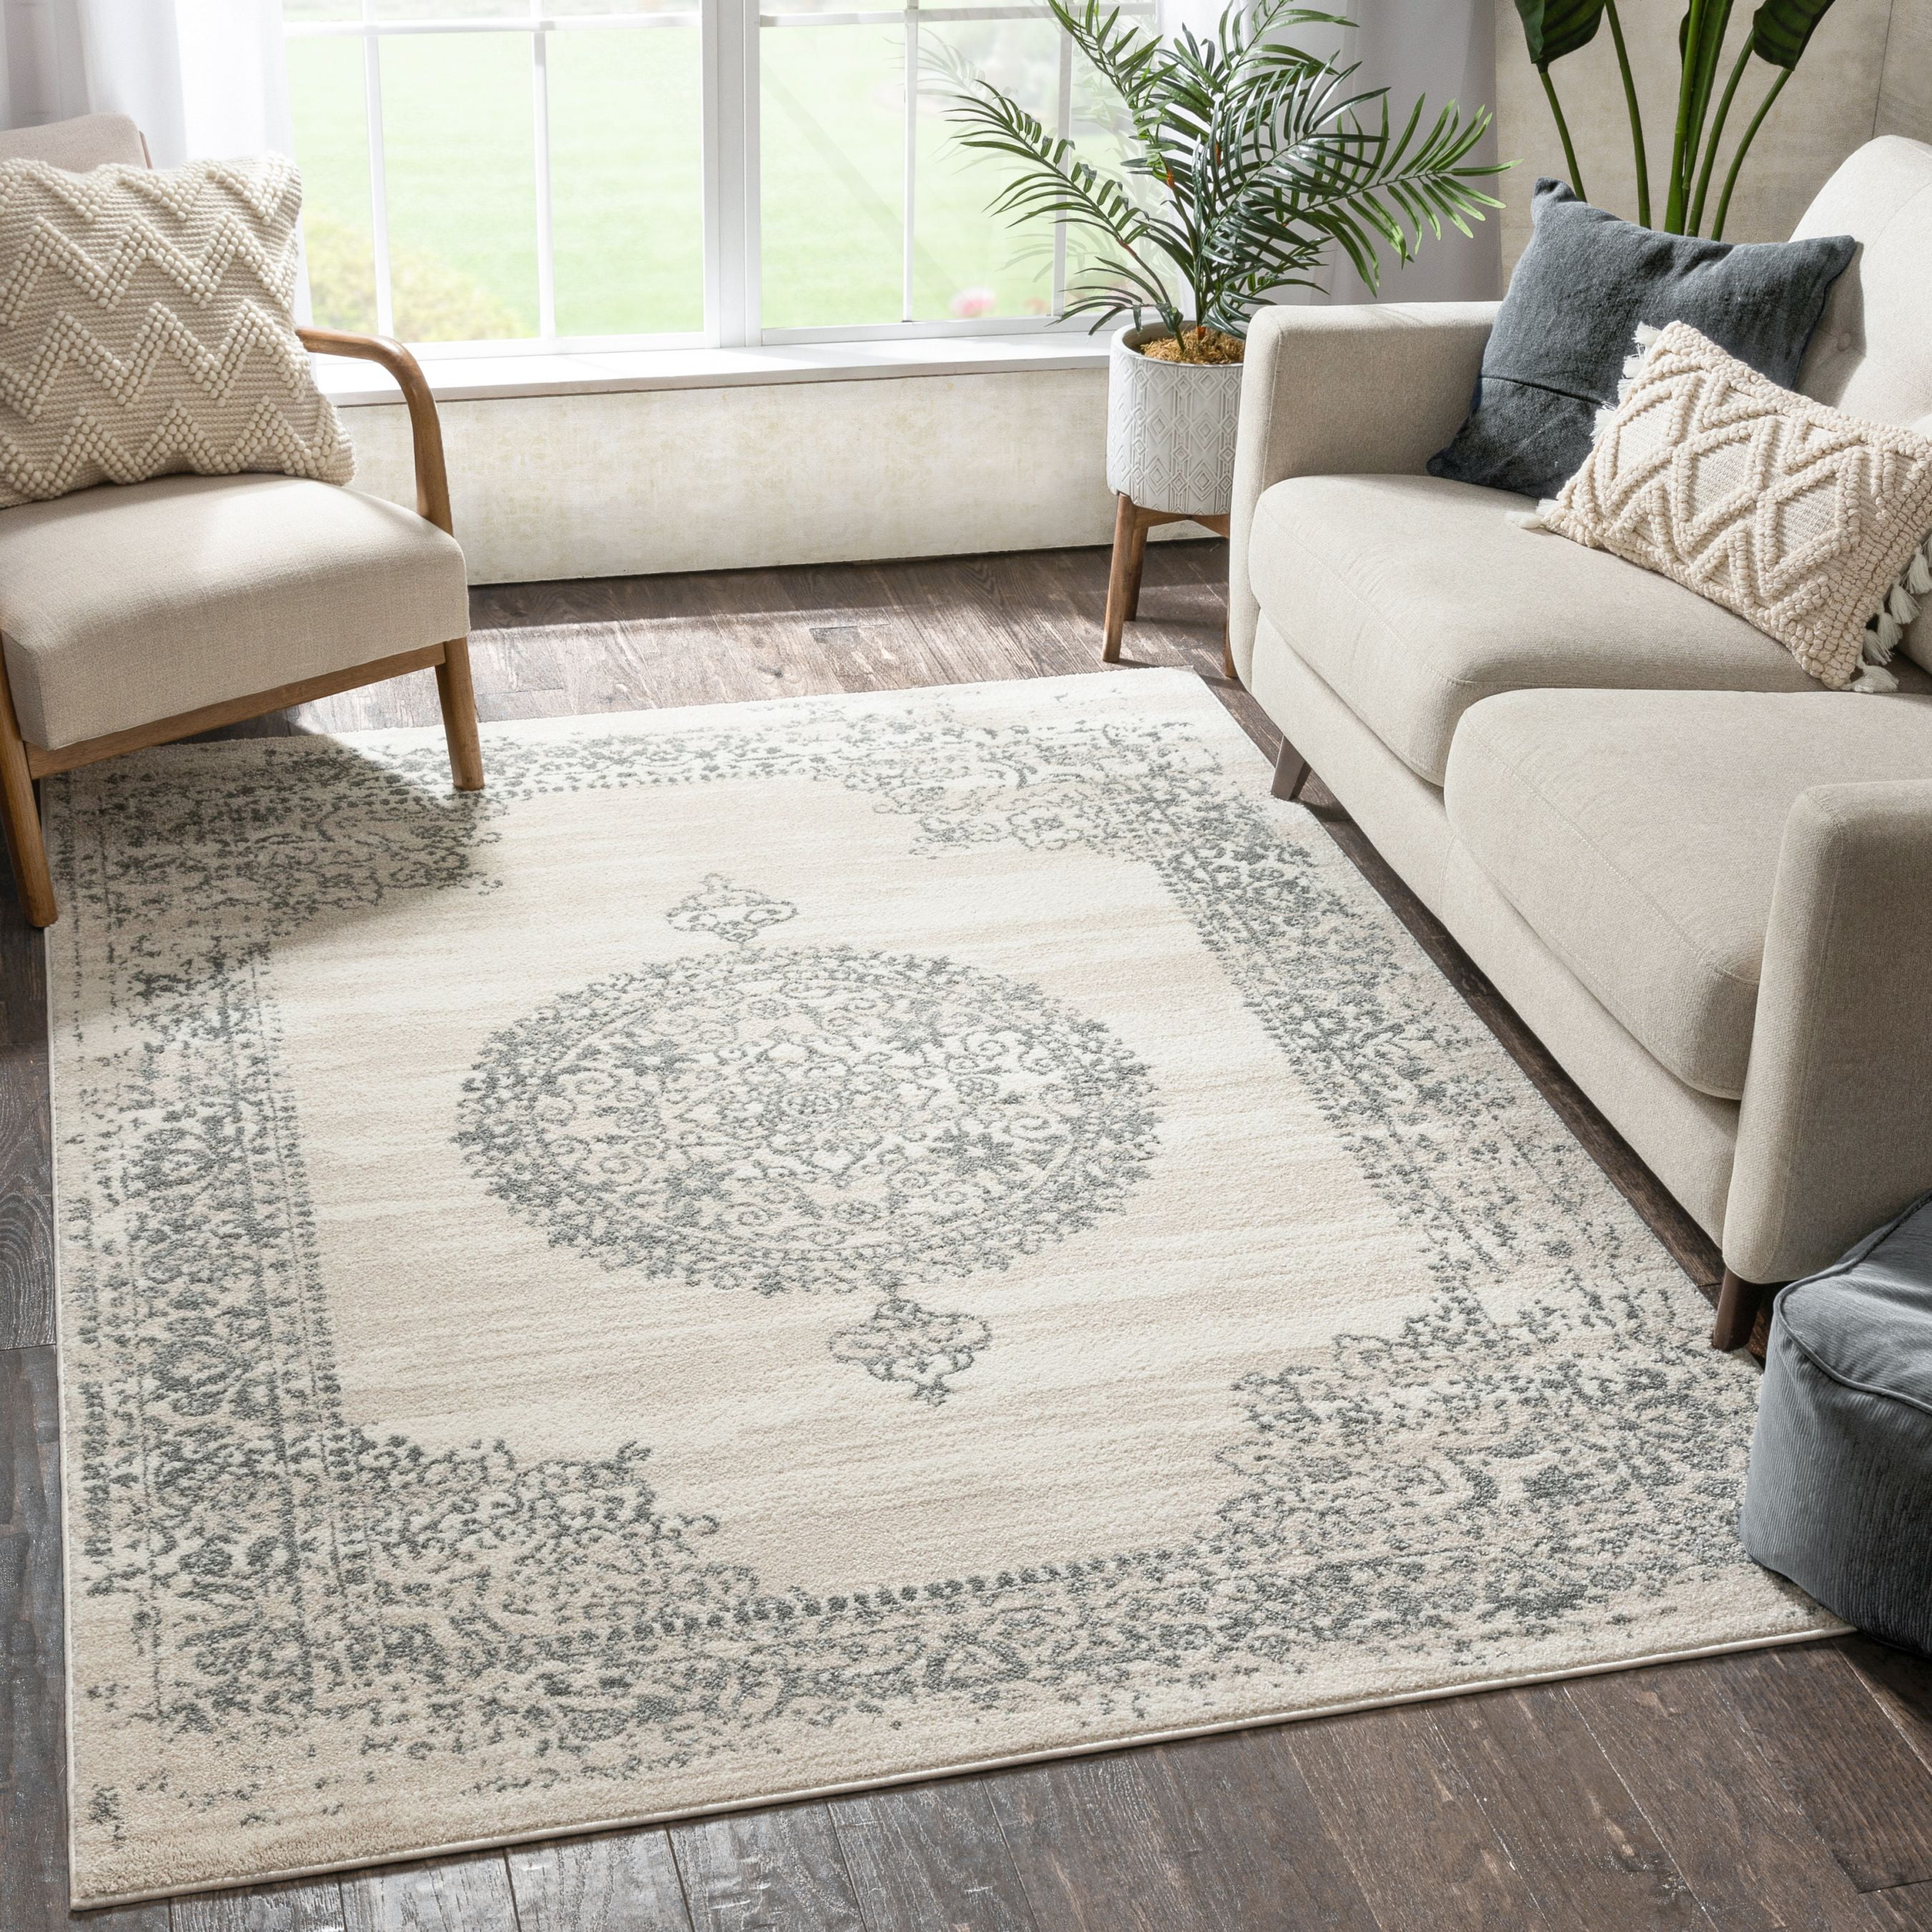 Bedroom 349389 Area Rug for Living Room eCarpet Gallery Hand-Knotted Sienna Braided Brown Rug 4'9 x 7'10 